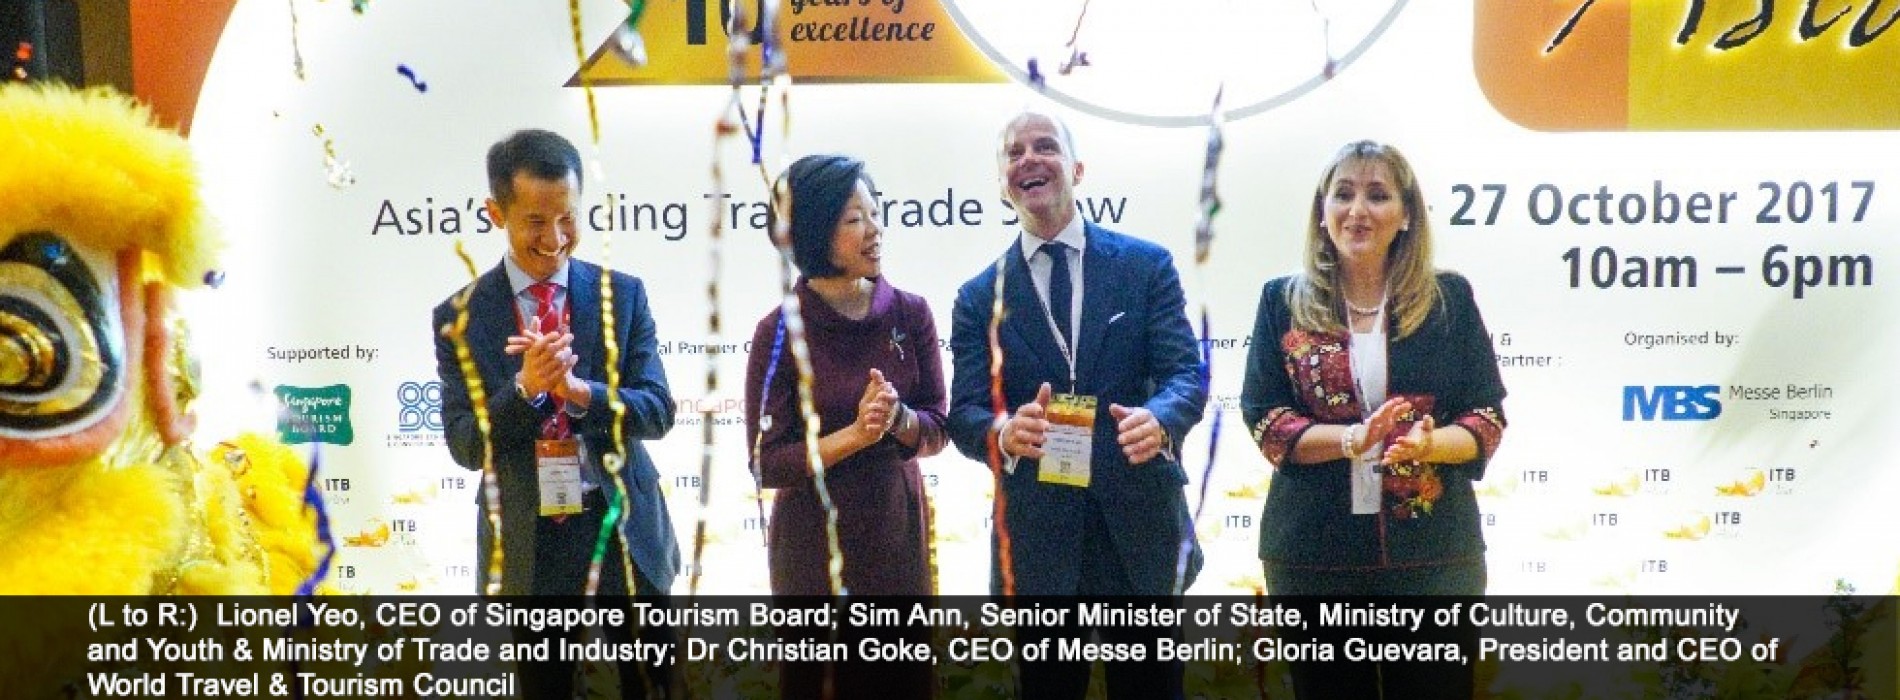 ITB Asia 2017 wraps up 10th anniversary with record highs